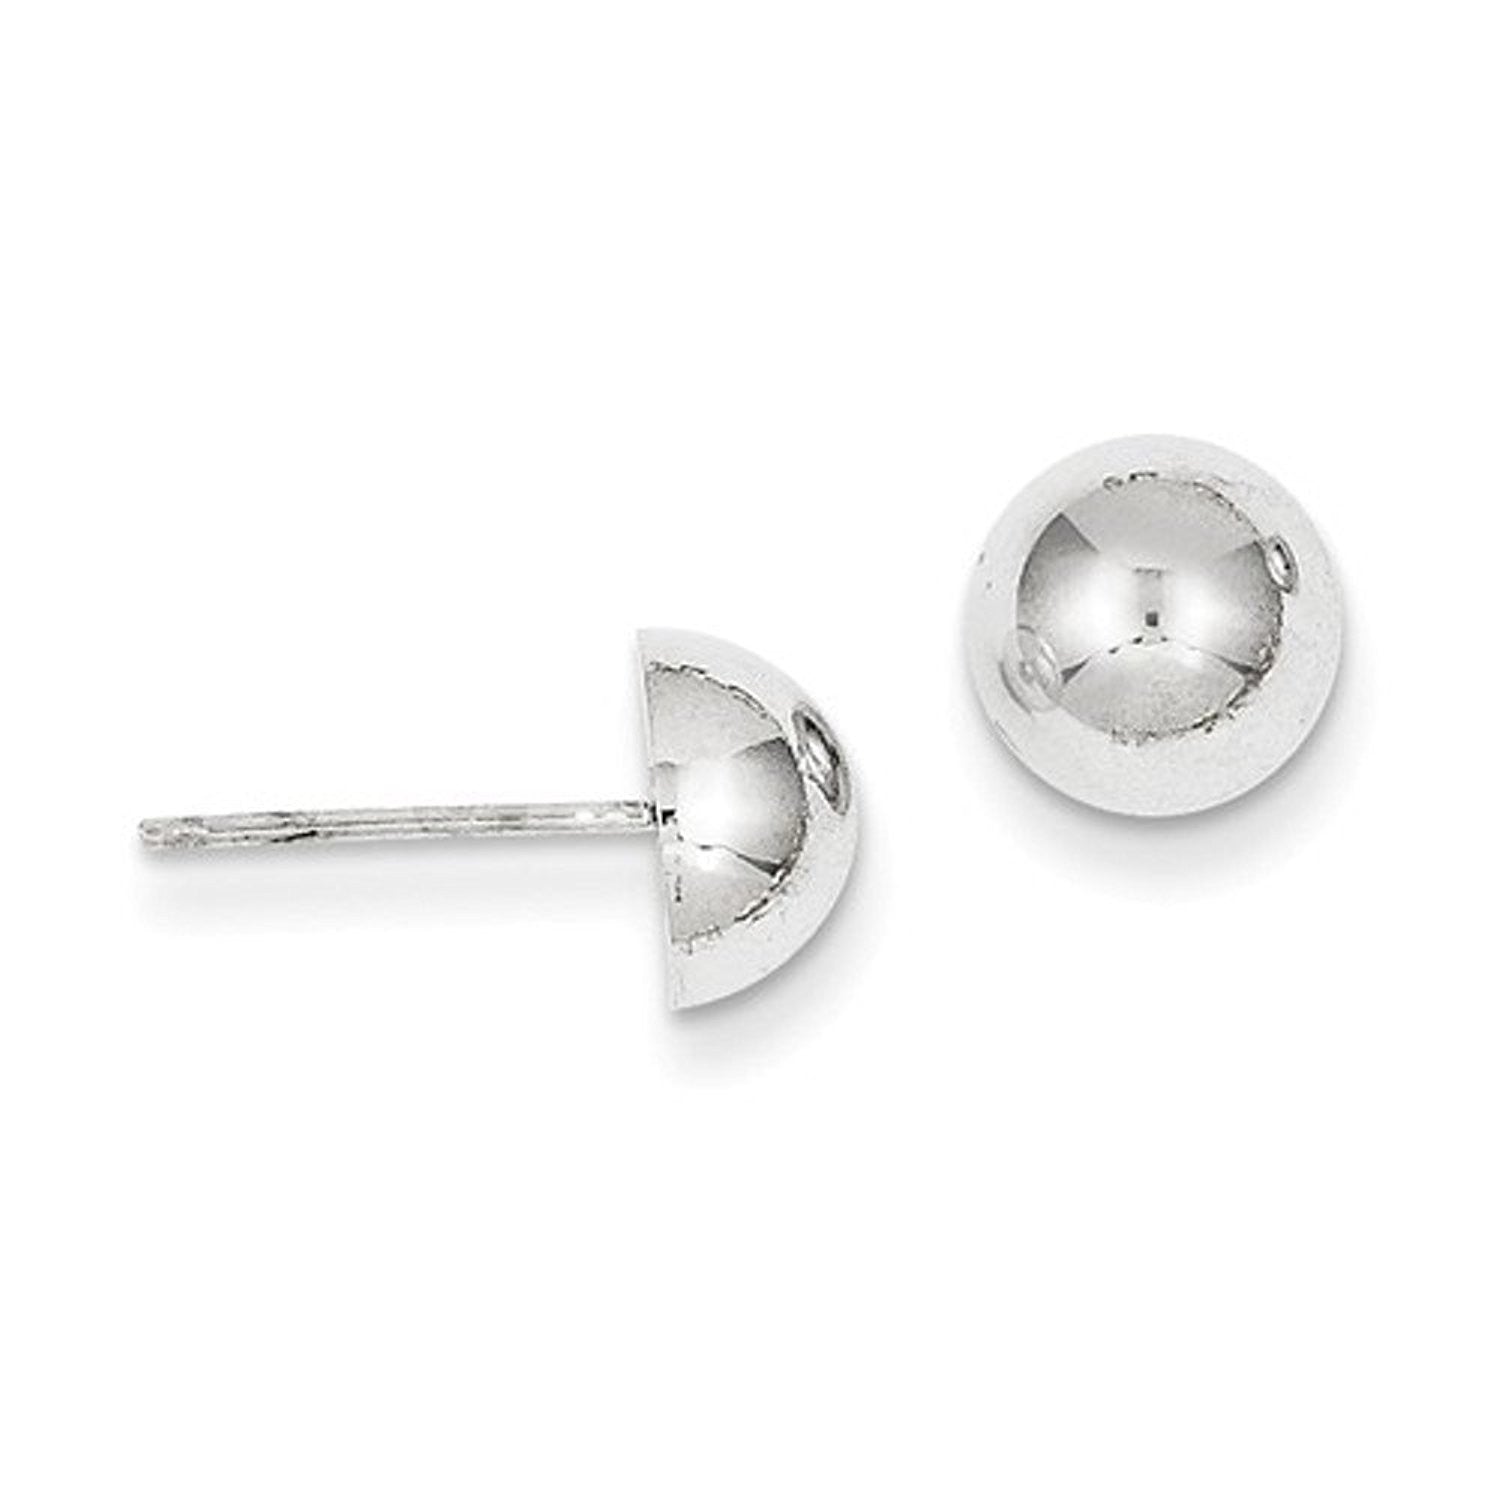 14k White Gold 8mm Polished Half Ball Button Post Earrings